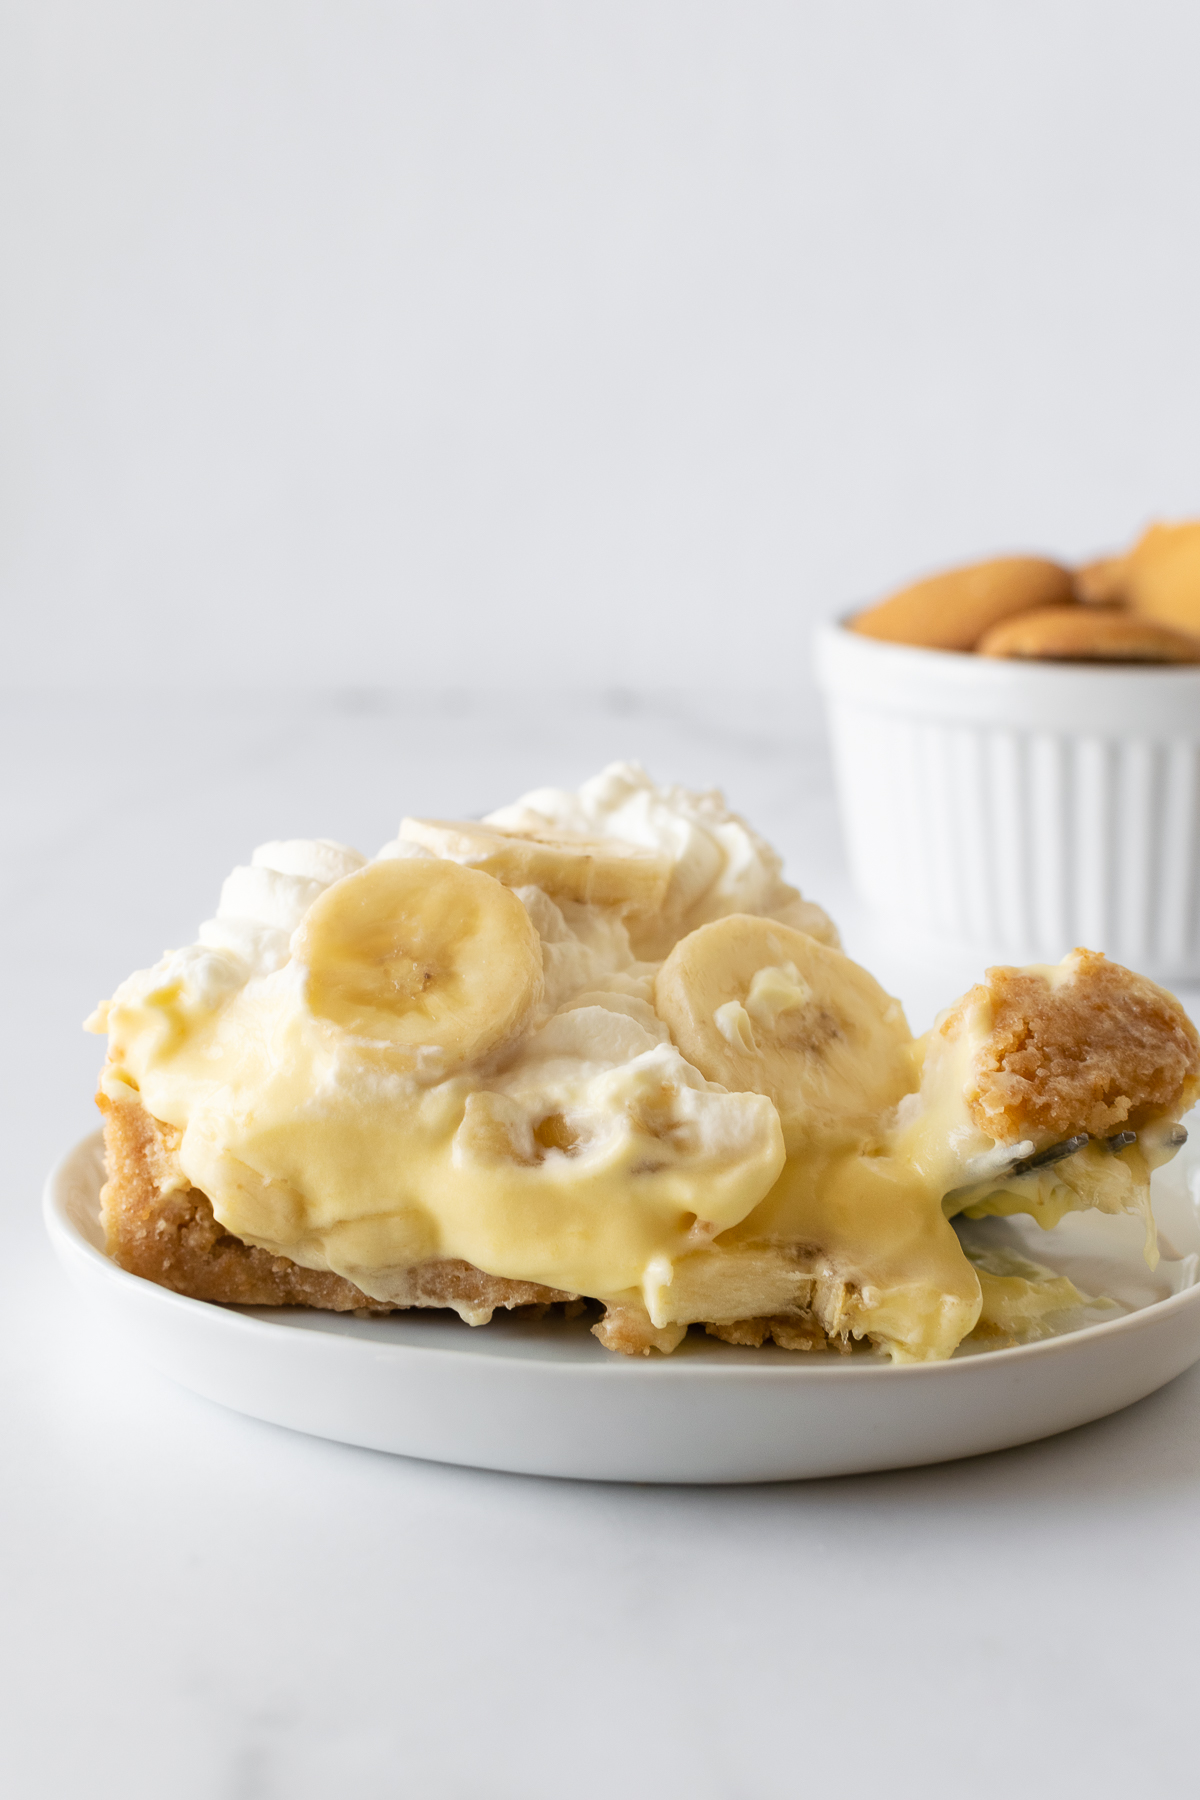 Get ready to fall in love with this no-bake banana pudding pie recipe. It starts with a buttery Nilla Wafer cookie crust, a layer of fresh banana slices and creamy vanilla pudding, and finished with homemade whipped cream. After the first bite you'll immediately know why it's loved by many!